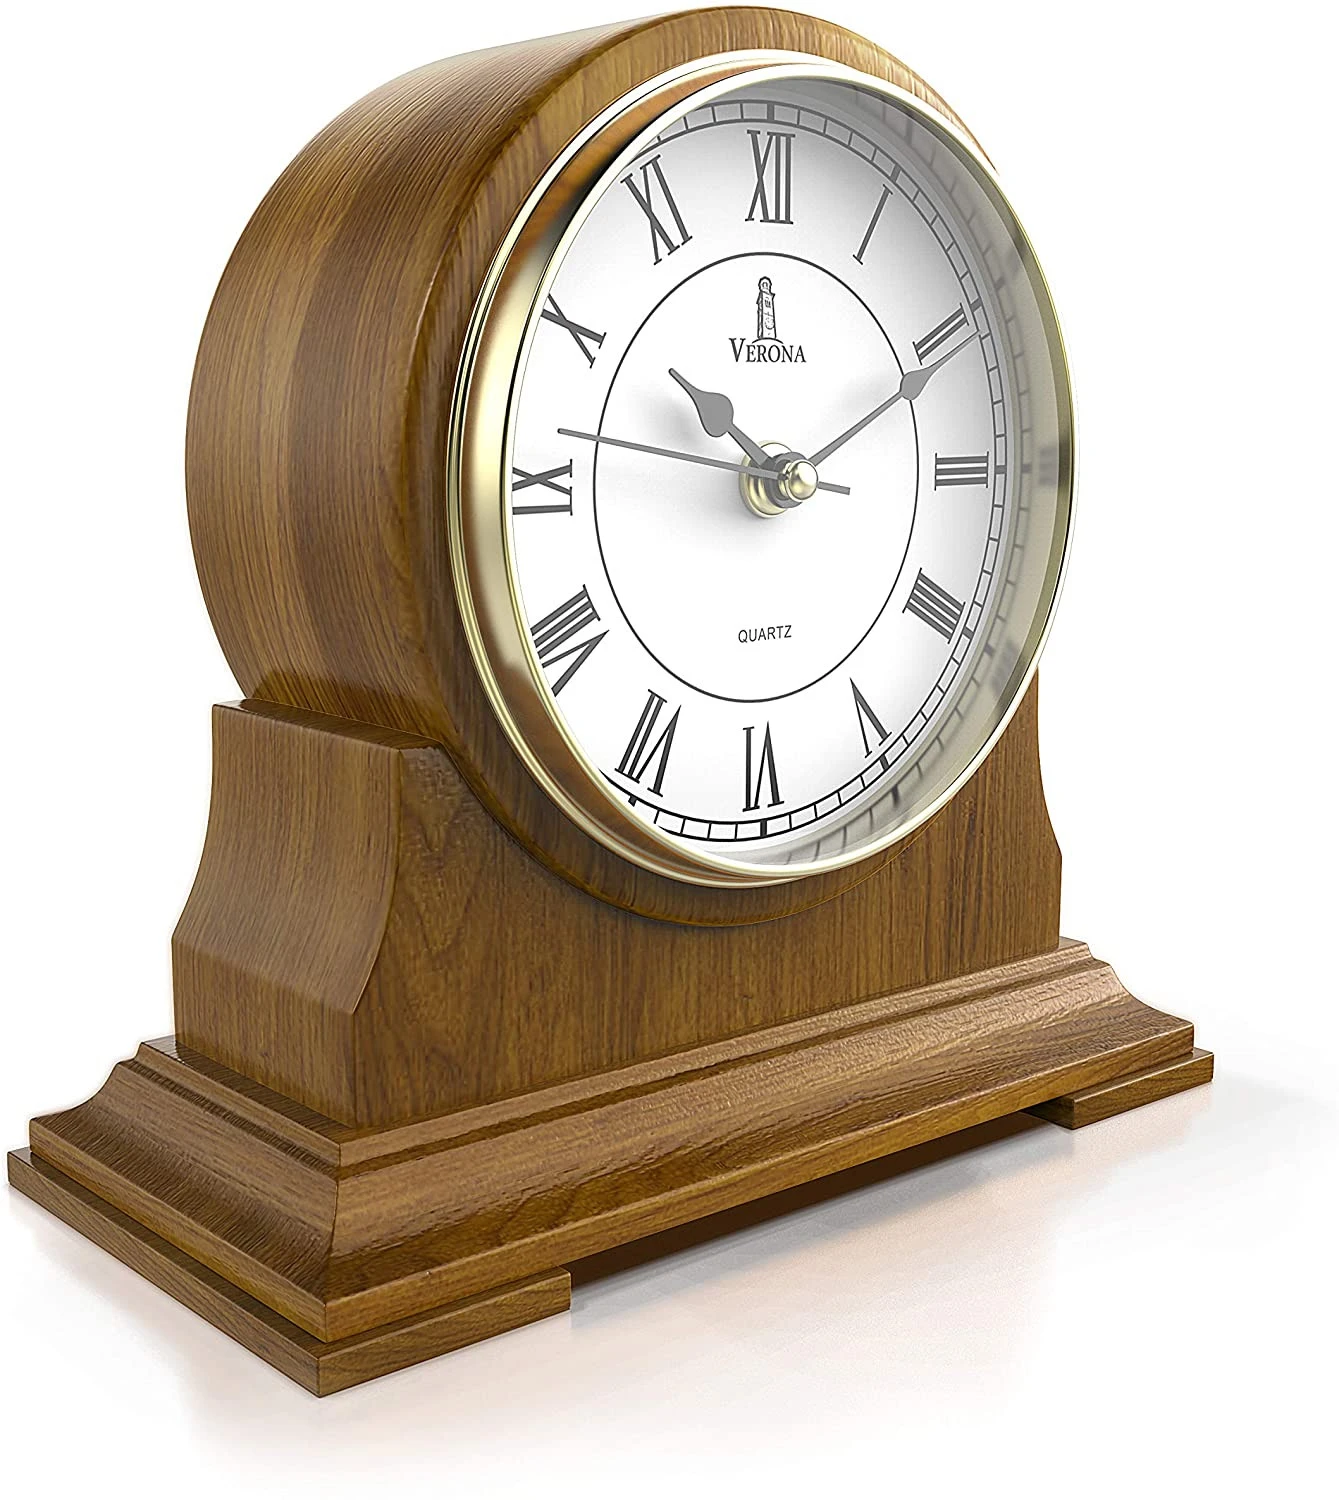 7.5"x7.5" European Antique Battery Operated Wood Non Chiming Grandfather Table Wooden Mantle Clock